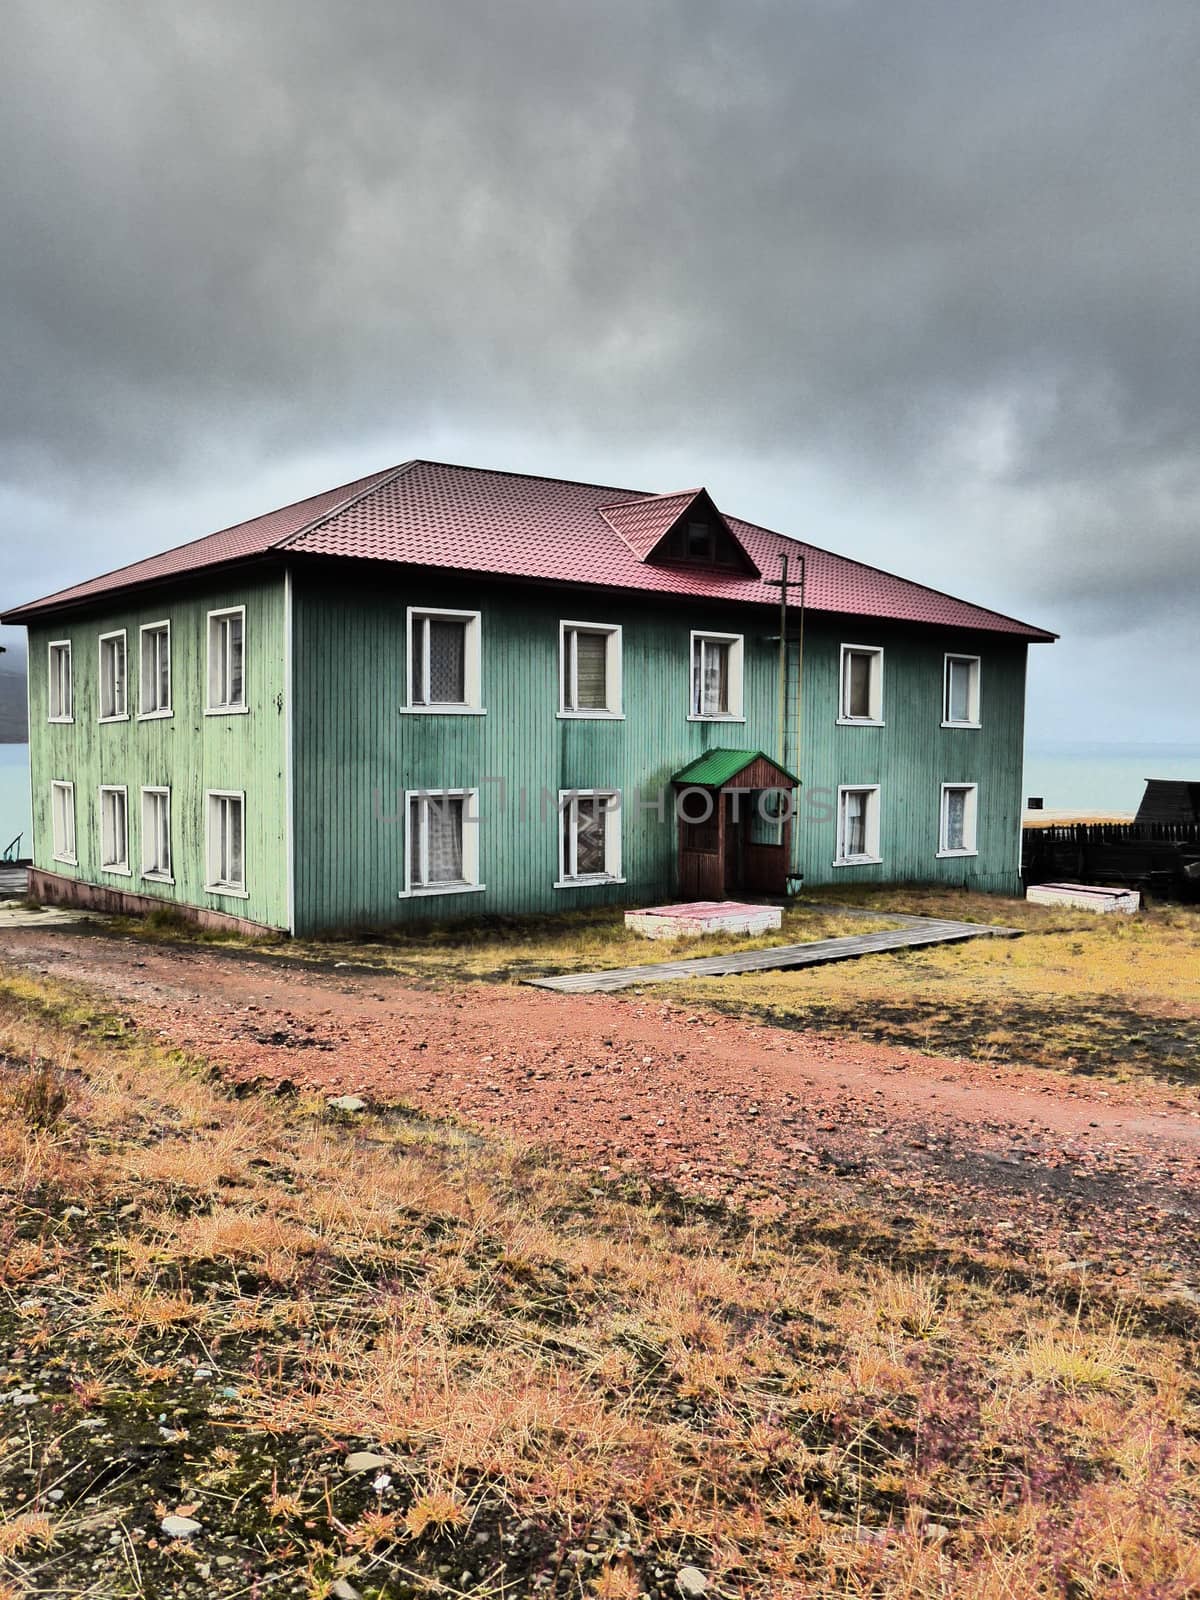 green house in Barentsburg, Svalbard, Norway in the fall